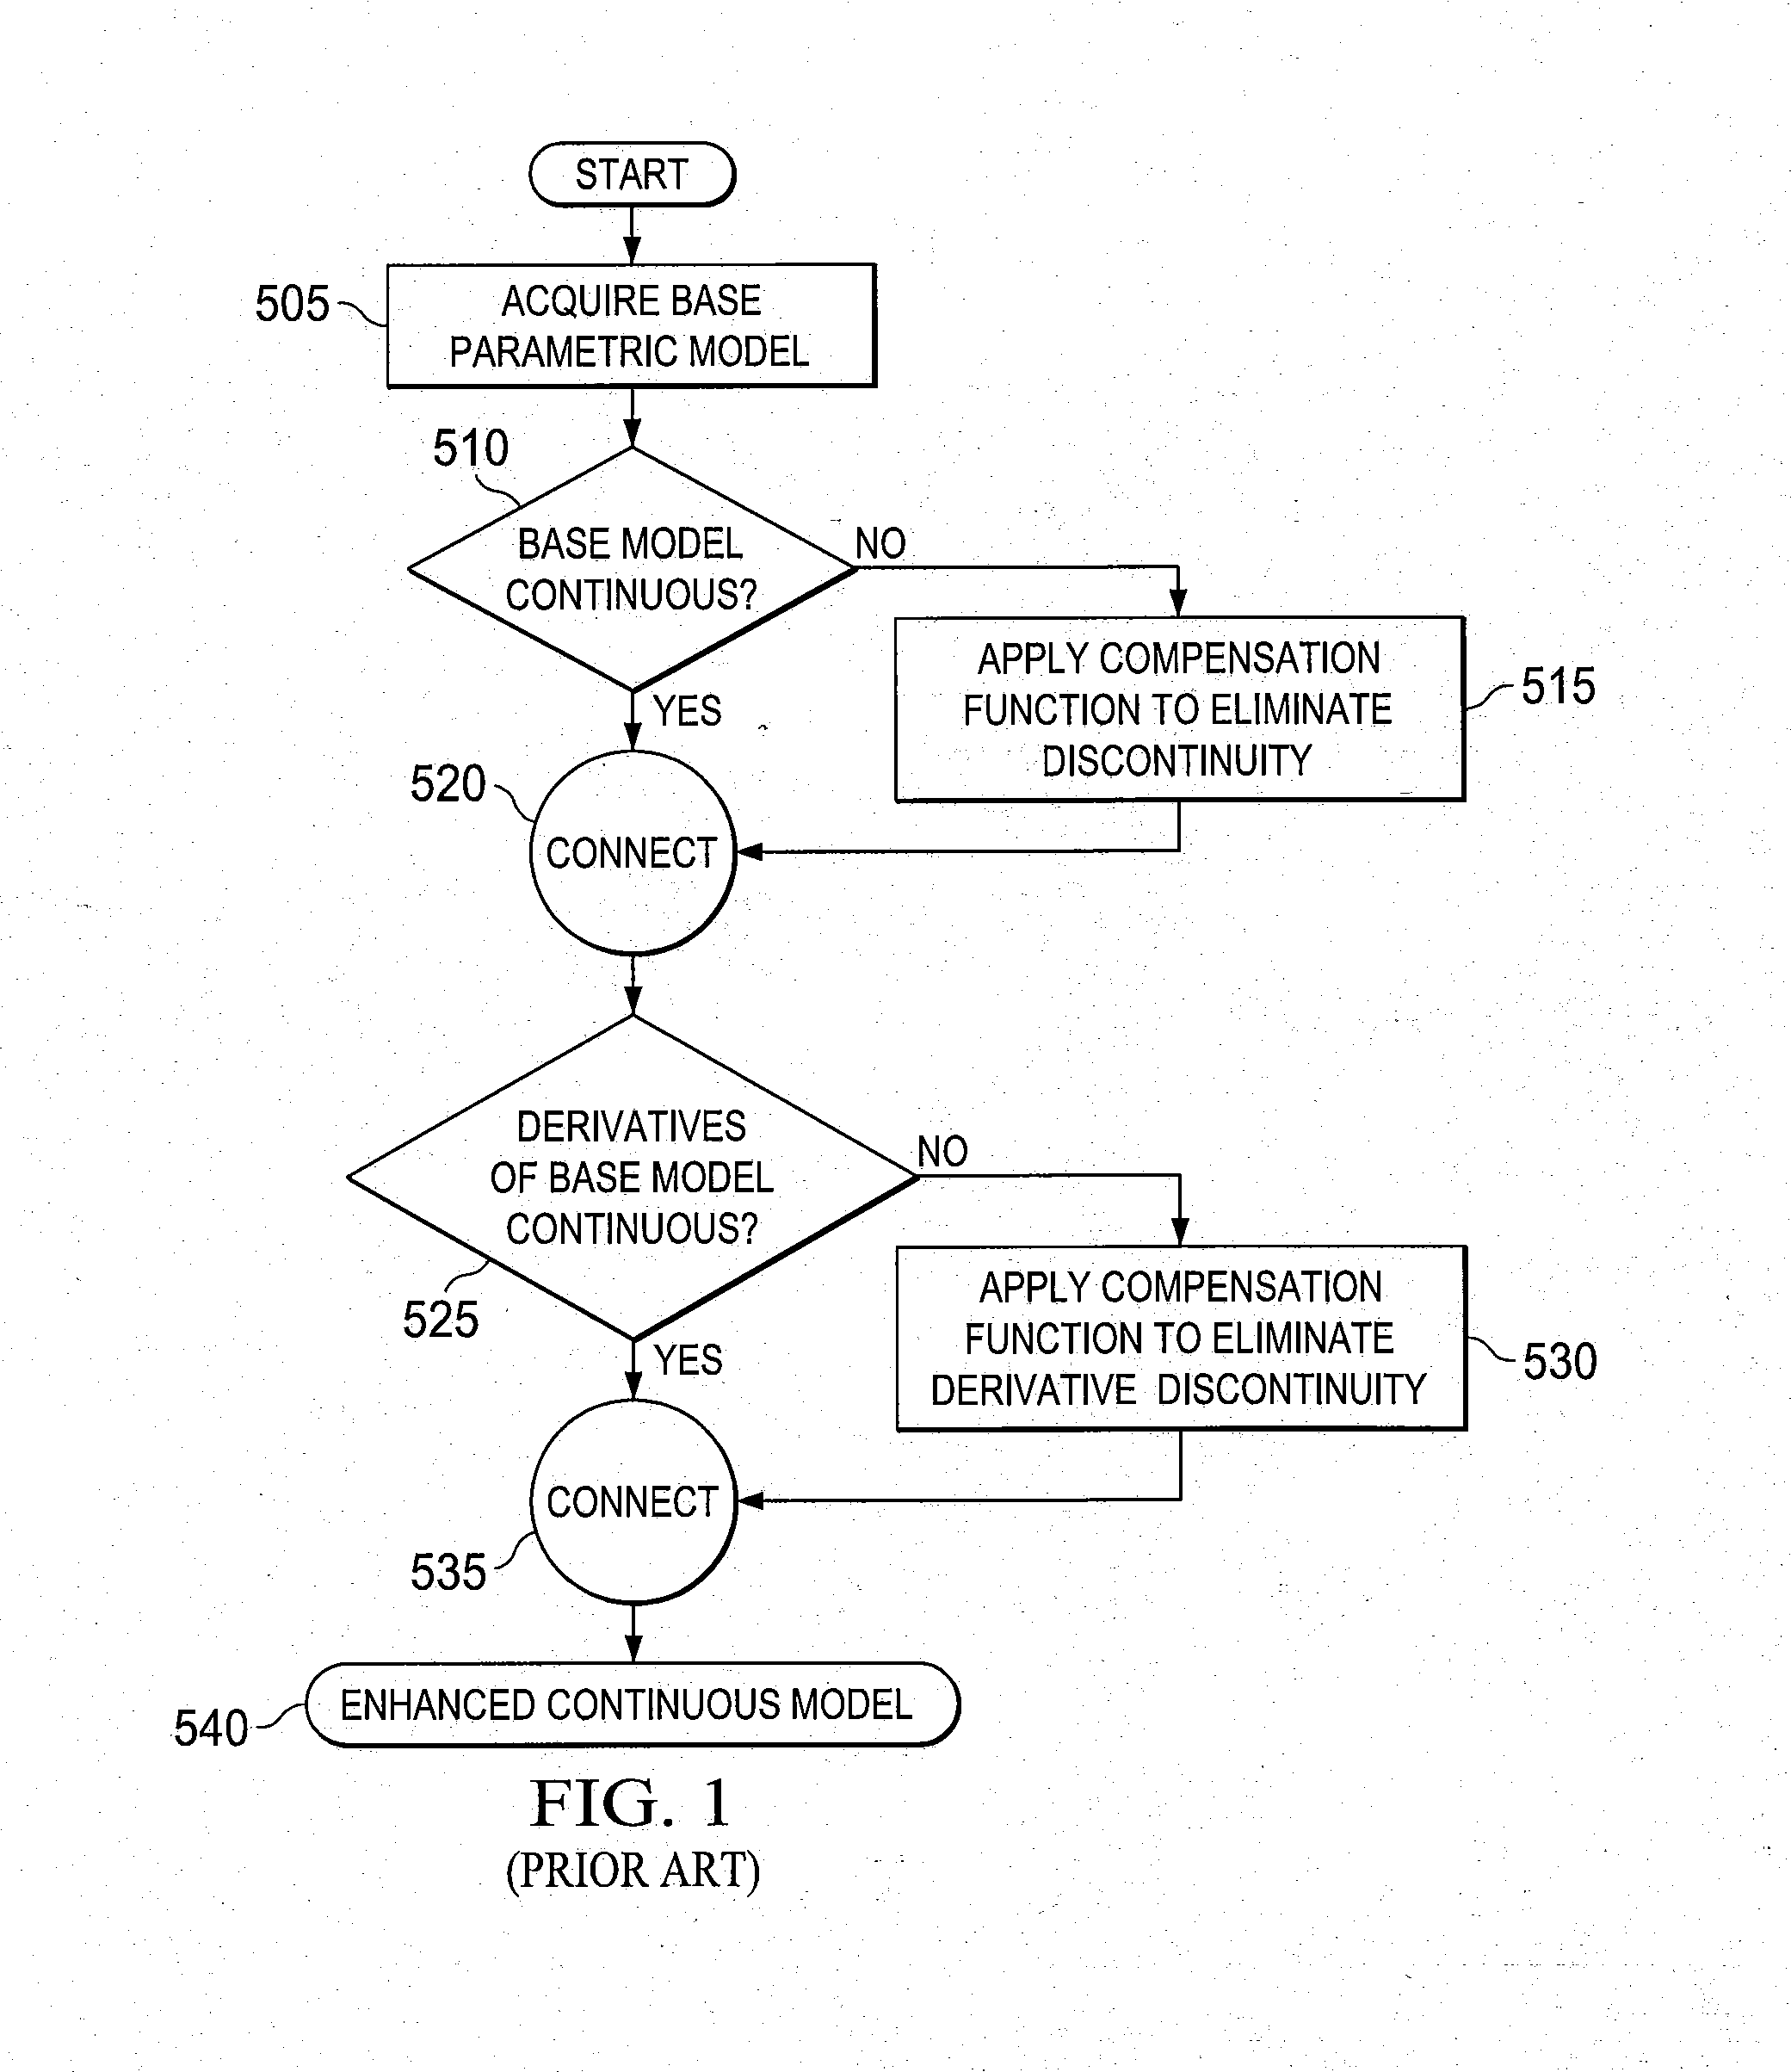 Method For Simulating Circuitry By Dynamically Modifying Device Models That Are Problematic For Out-of-Range Voltages